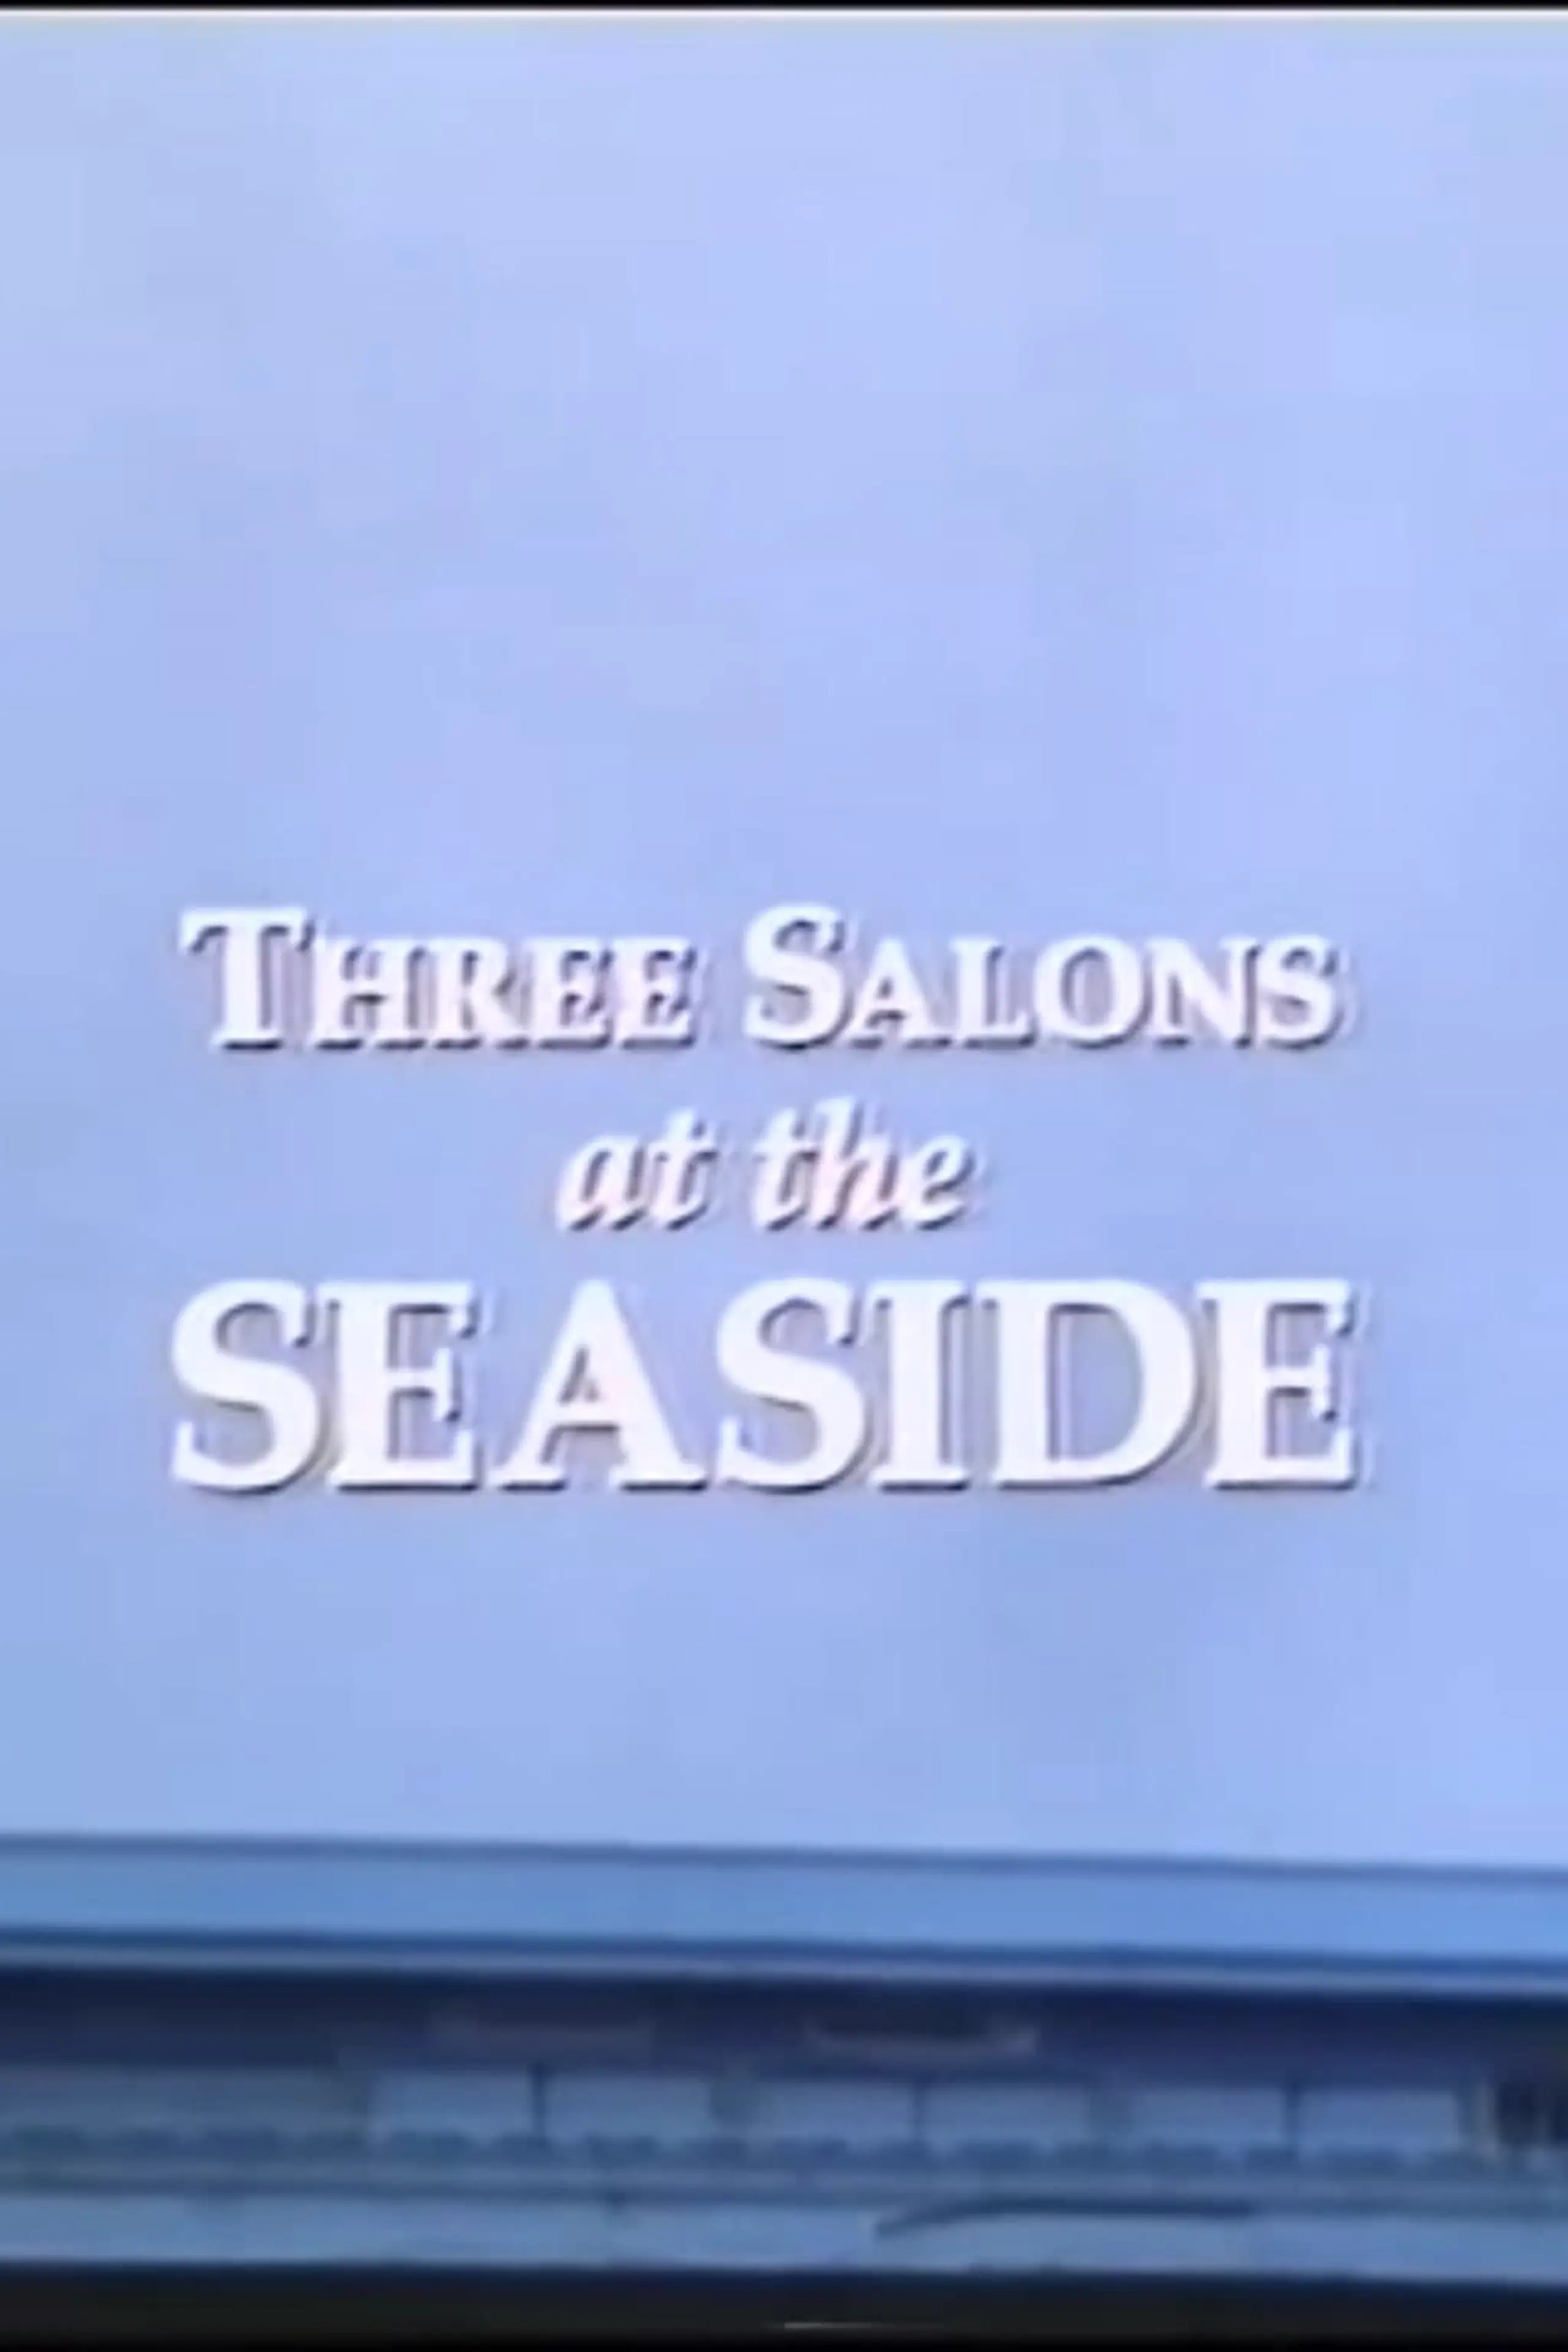 Three Salons at the Seaside